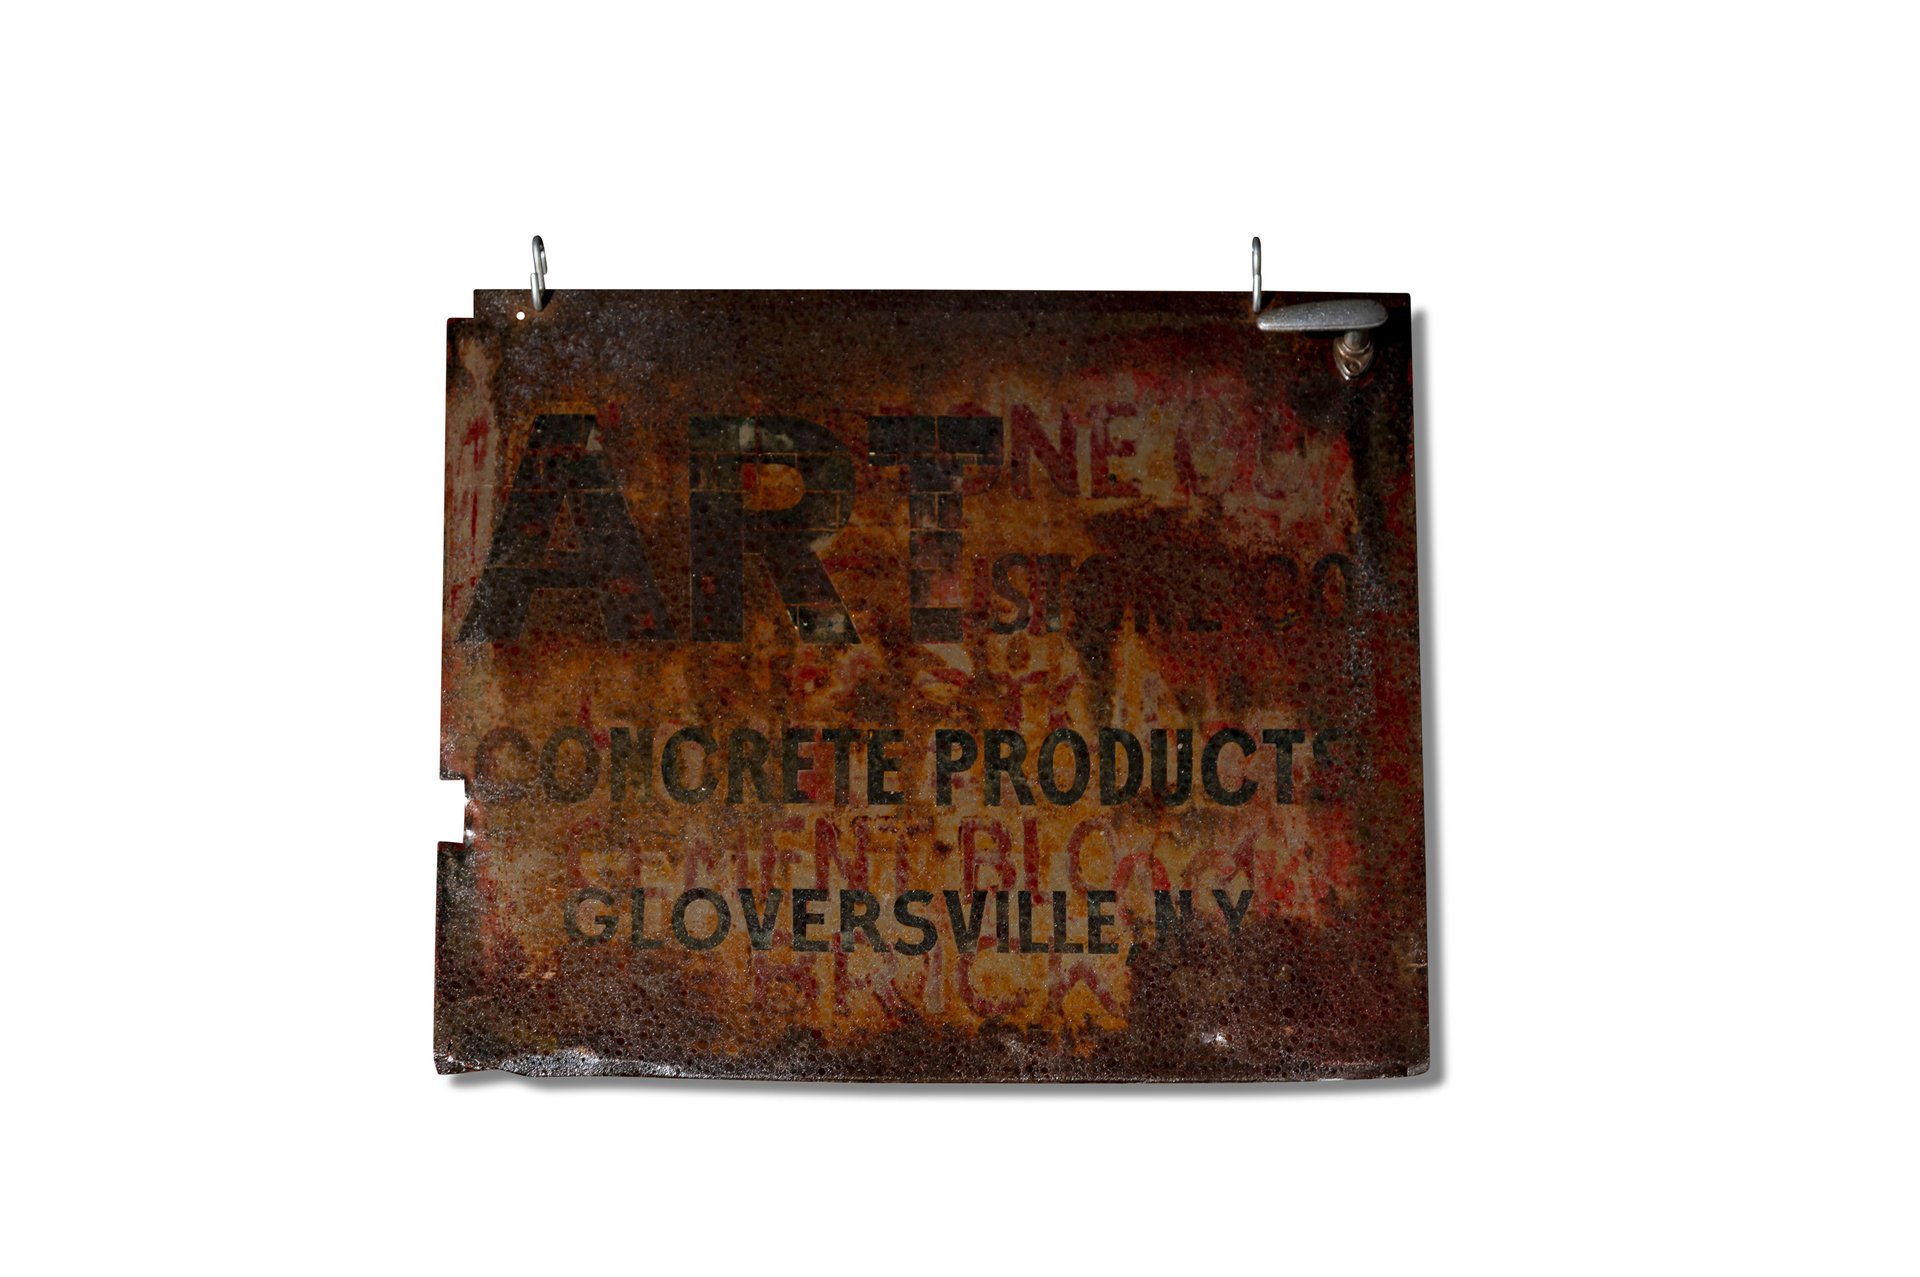 For Sale 'Concrete Advertising, Gloversville' Metal Sign